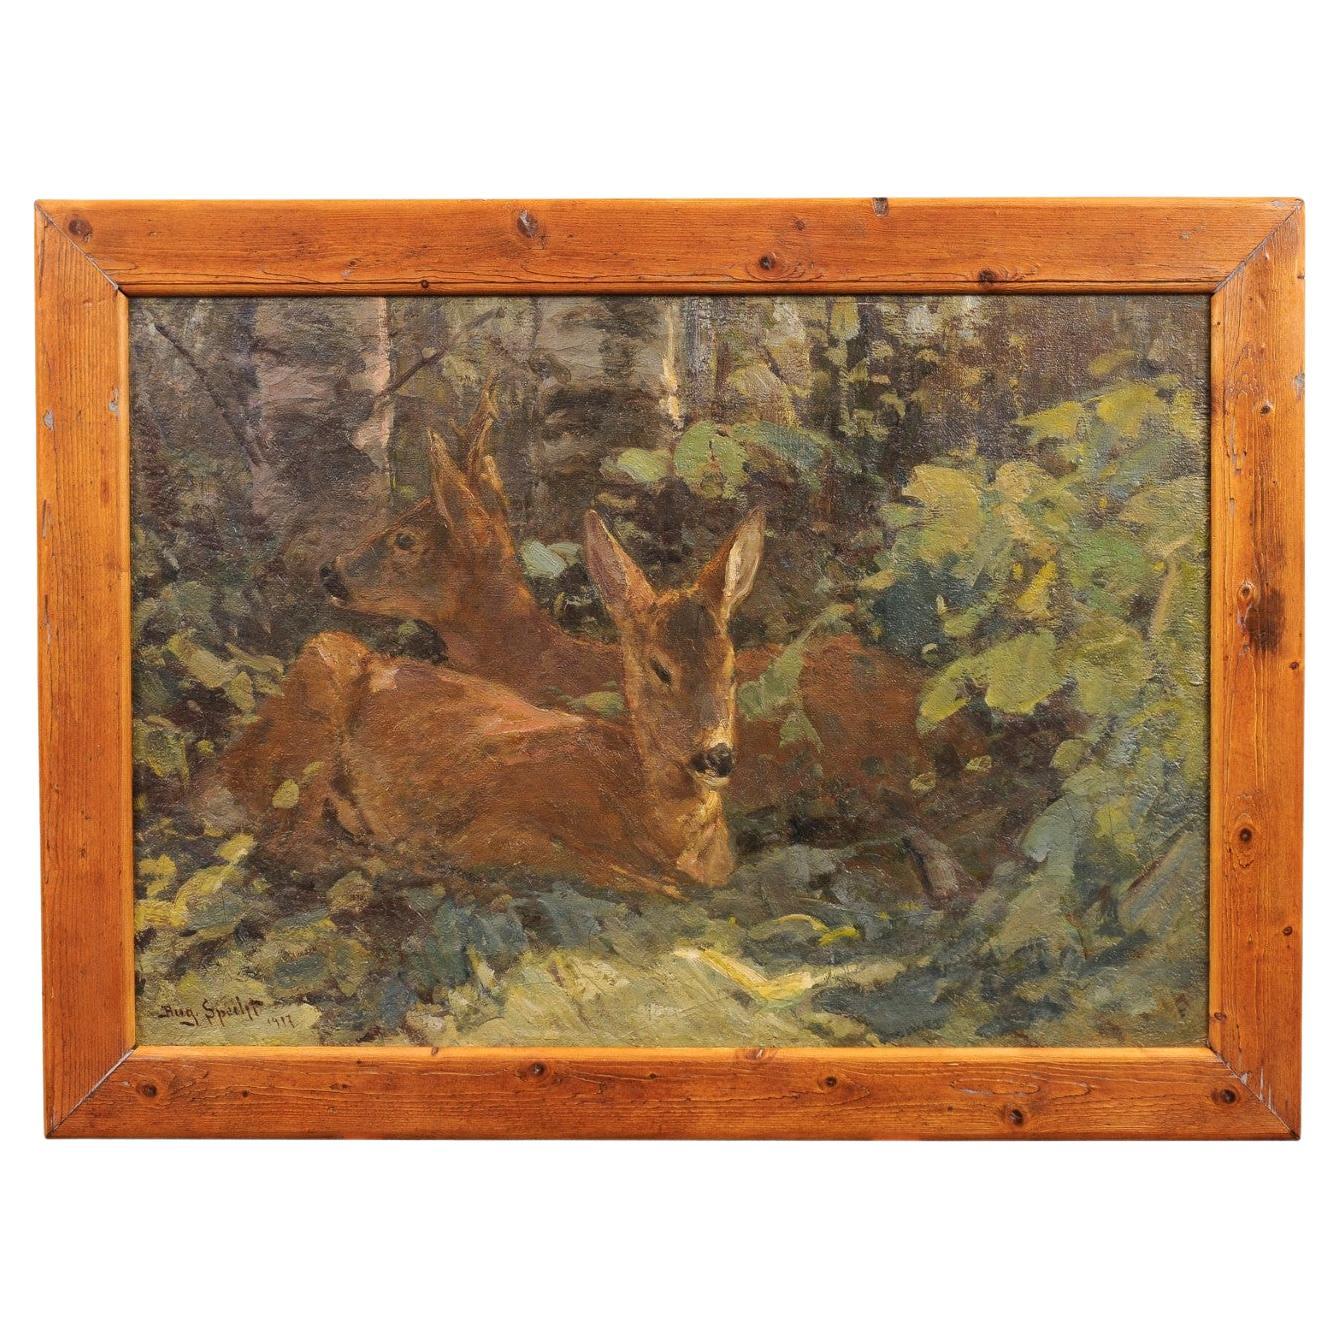 August Specht 1917 Oil Painting Titled Deer in the Woods in Old Fir Tree Frame